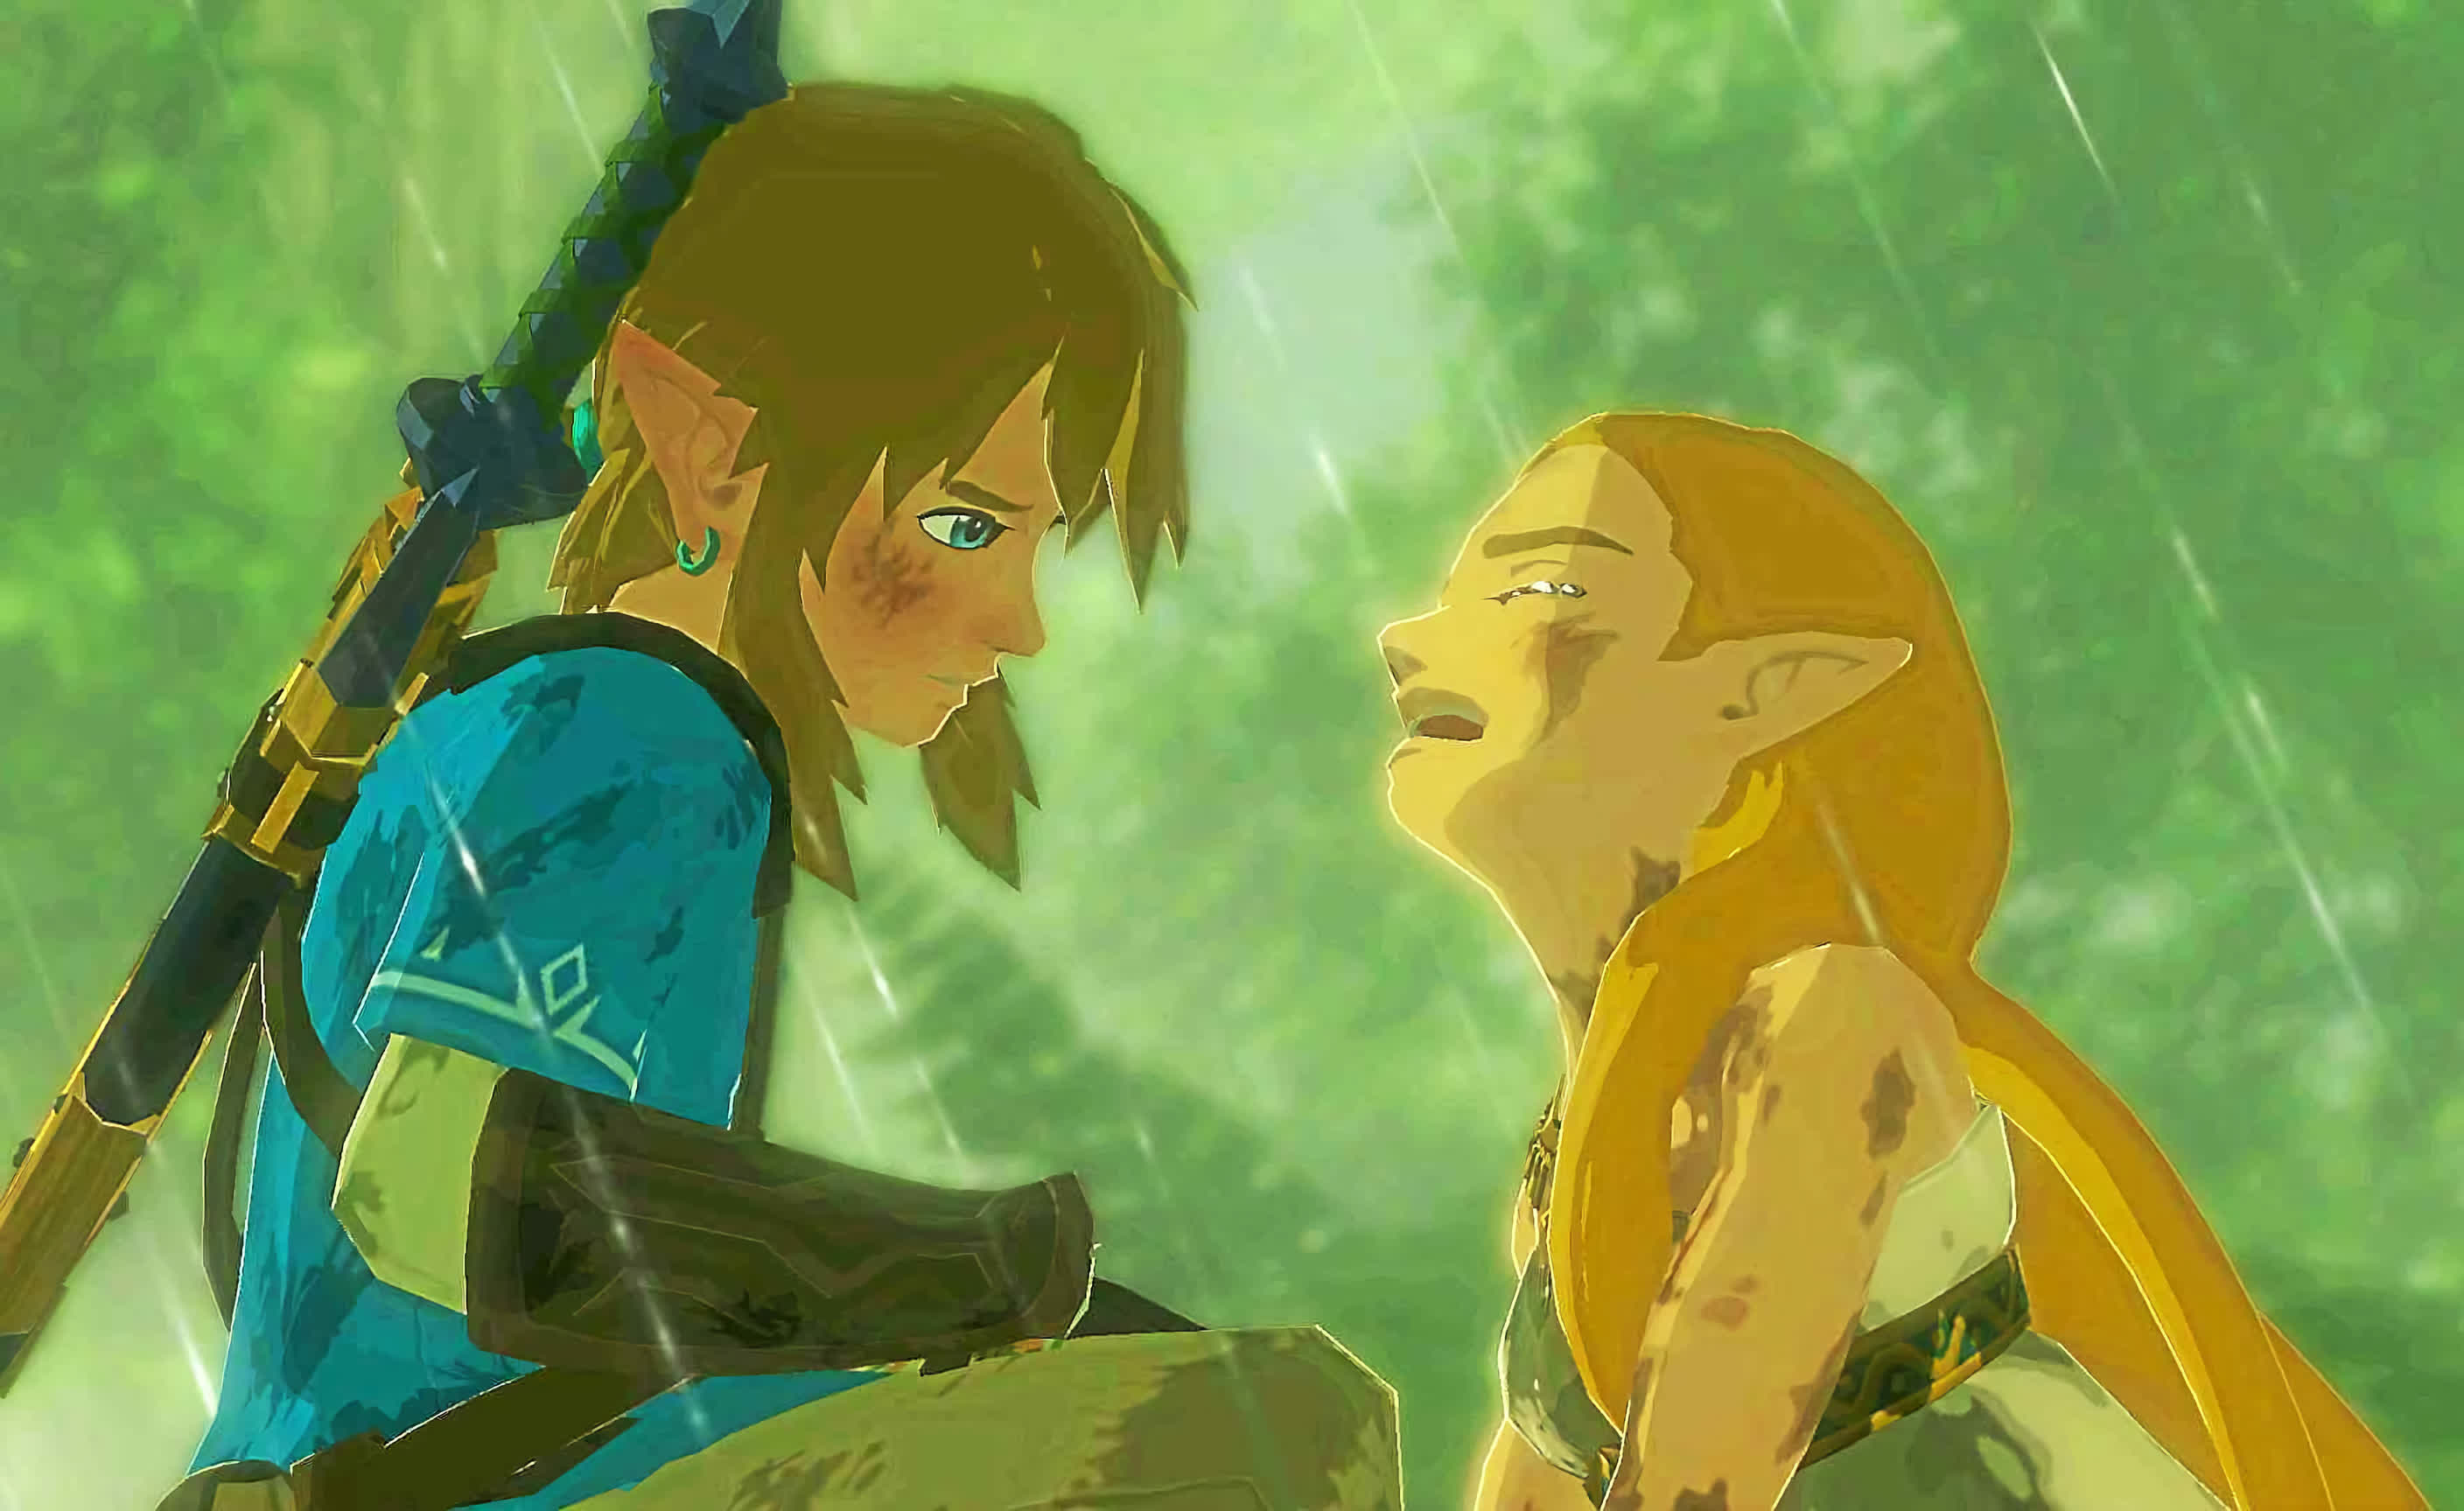 Nintendo pushes Breath of the Wild sequel to spring 2023